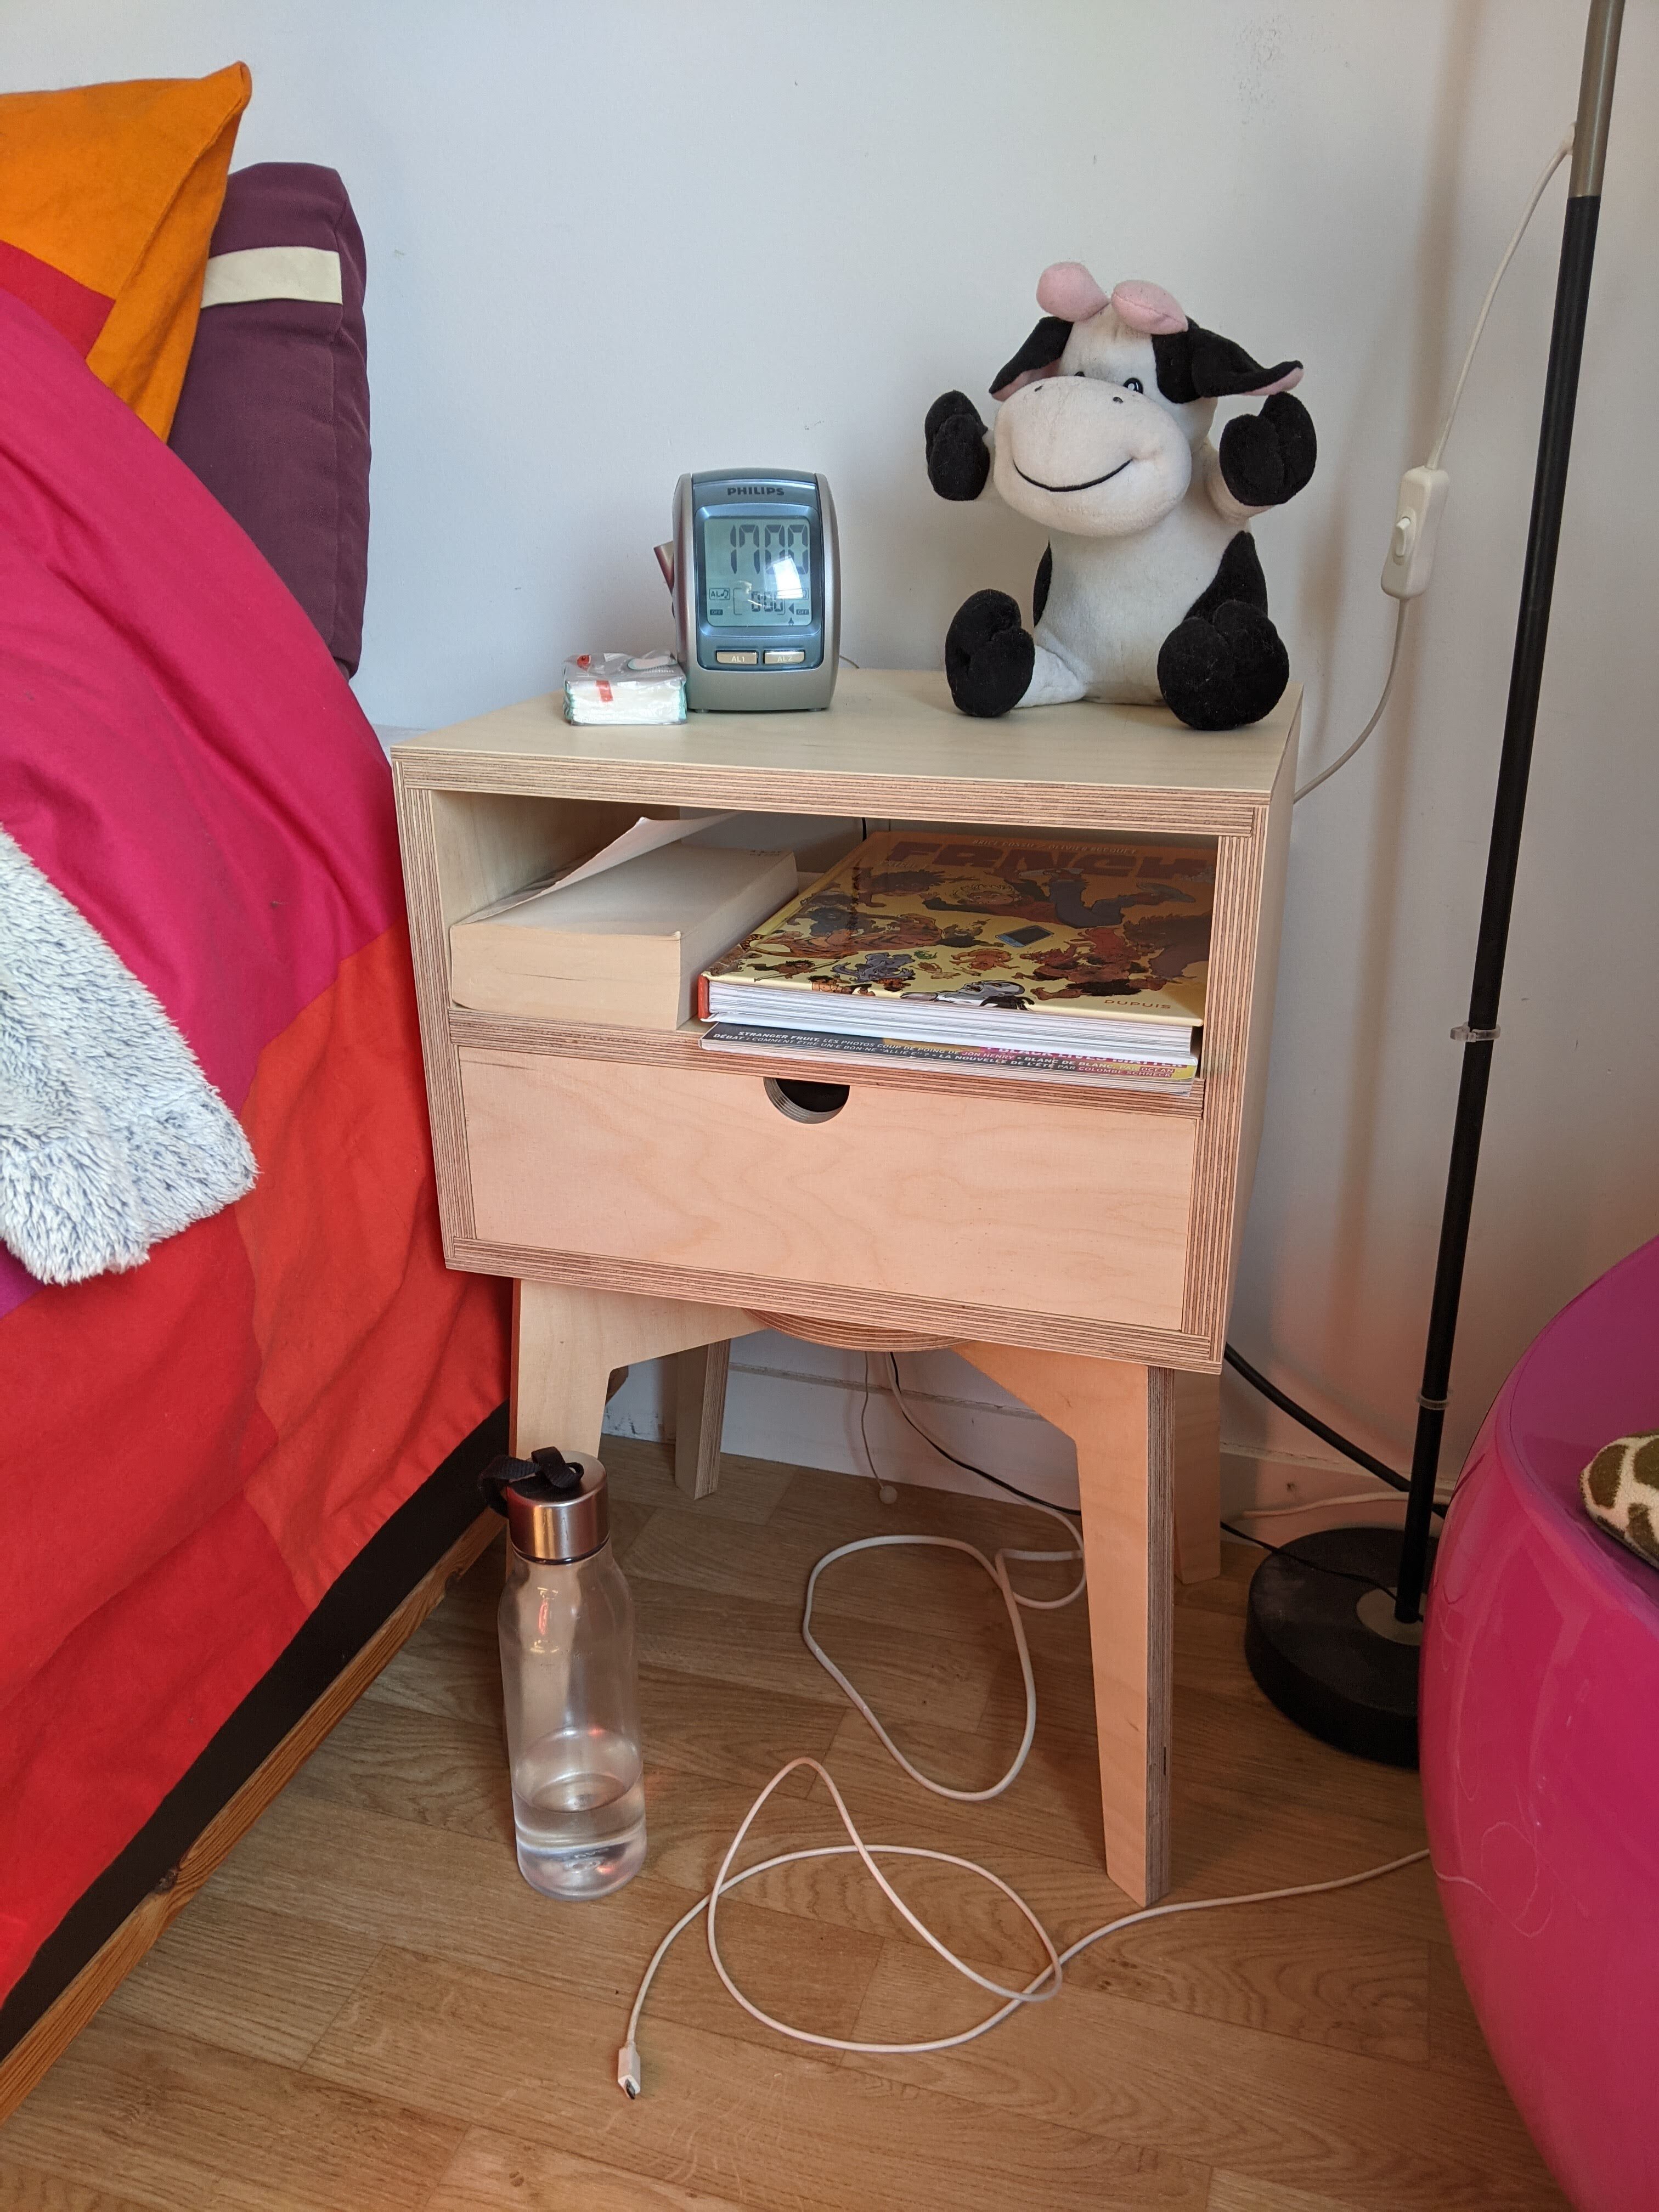 The finished bedside table